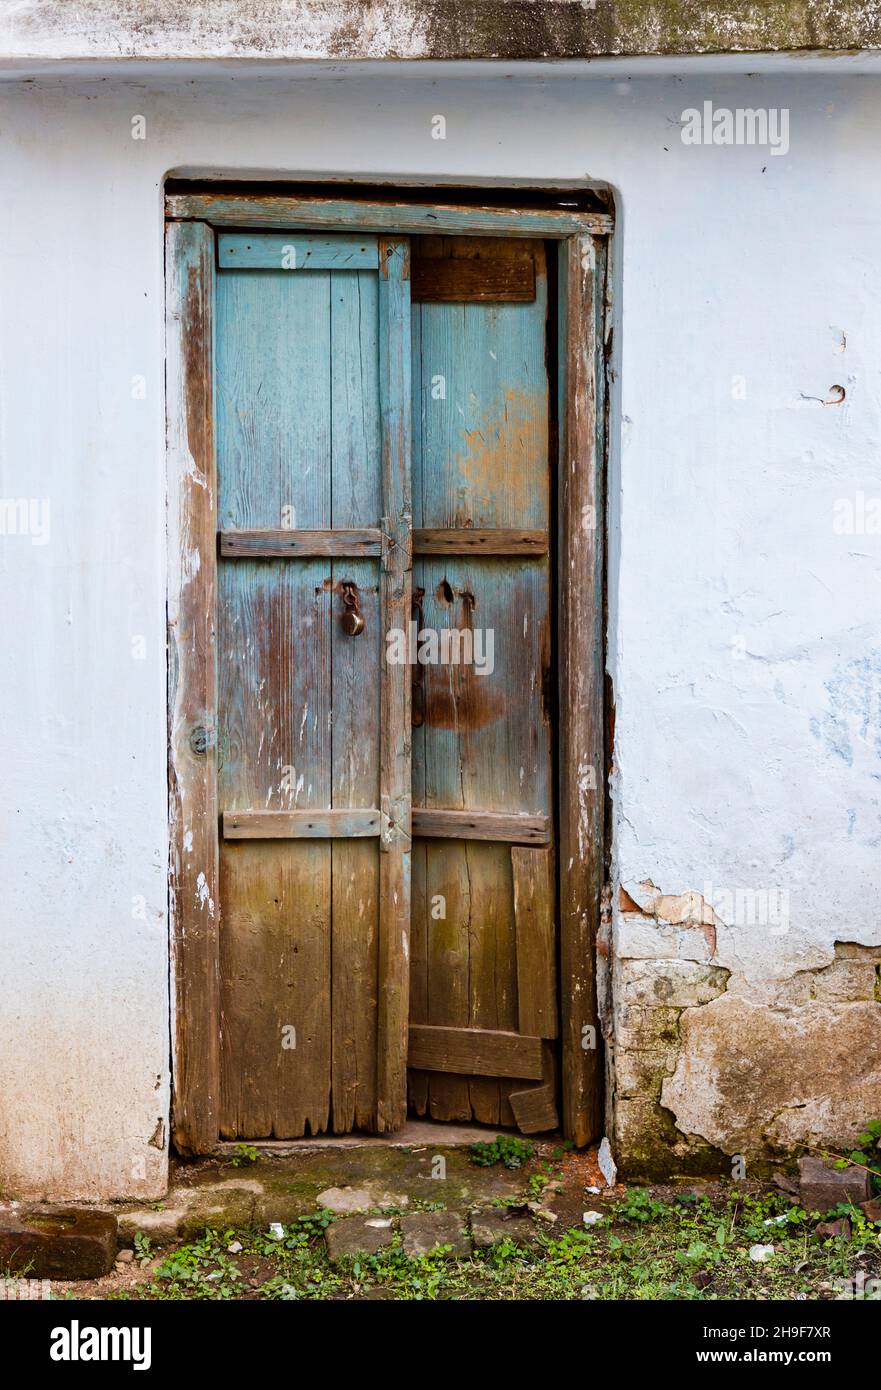 Dilapidated old wooden door in the white wall of a building in Pragpur, a heritage village in Kagra district, Himachal Pradesh, India Stock Photo